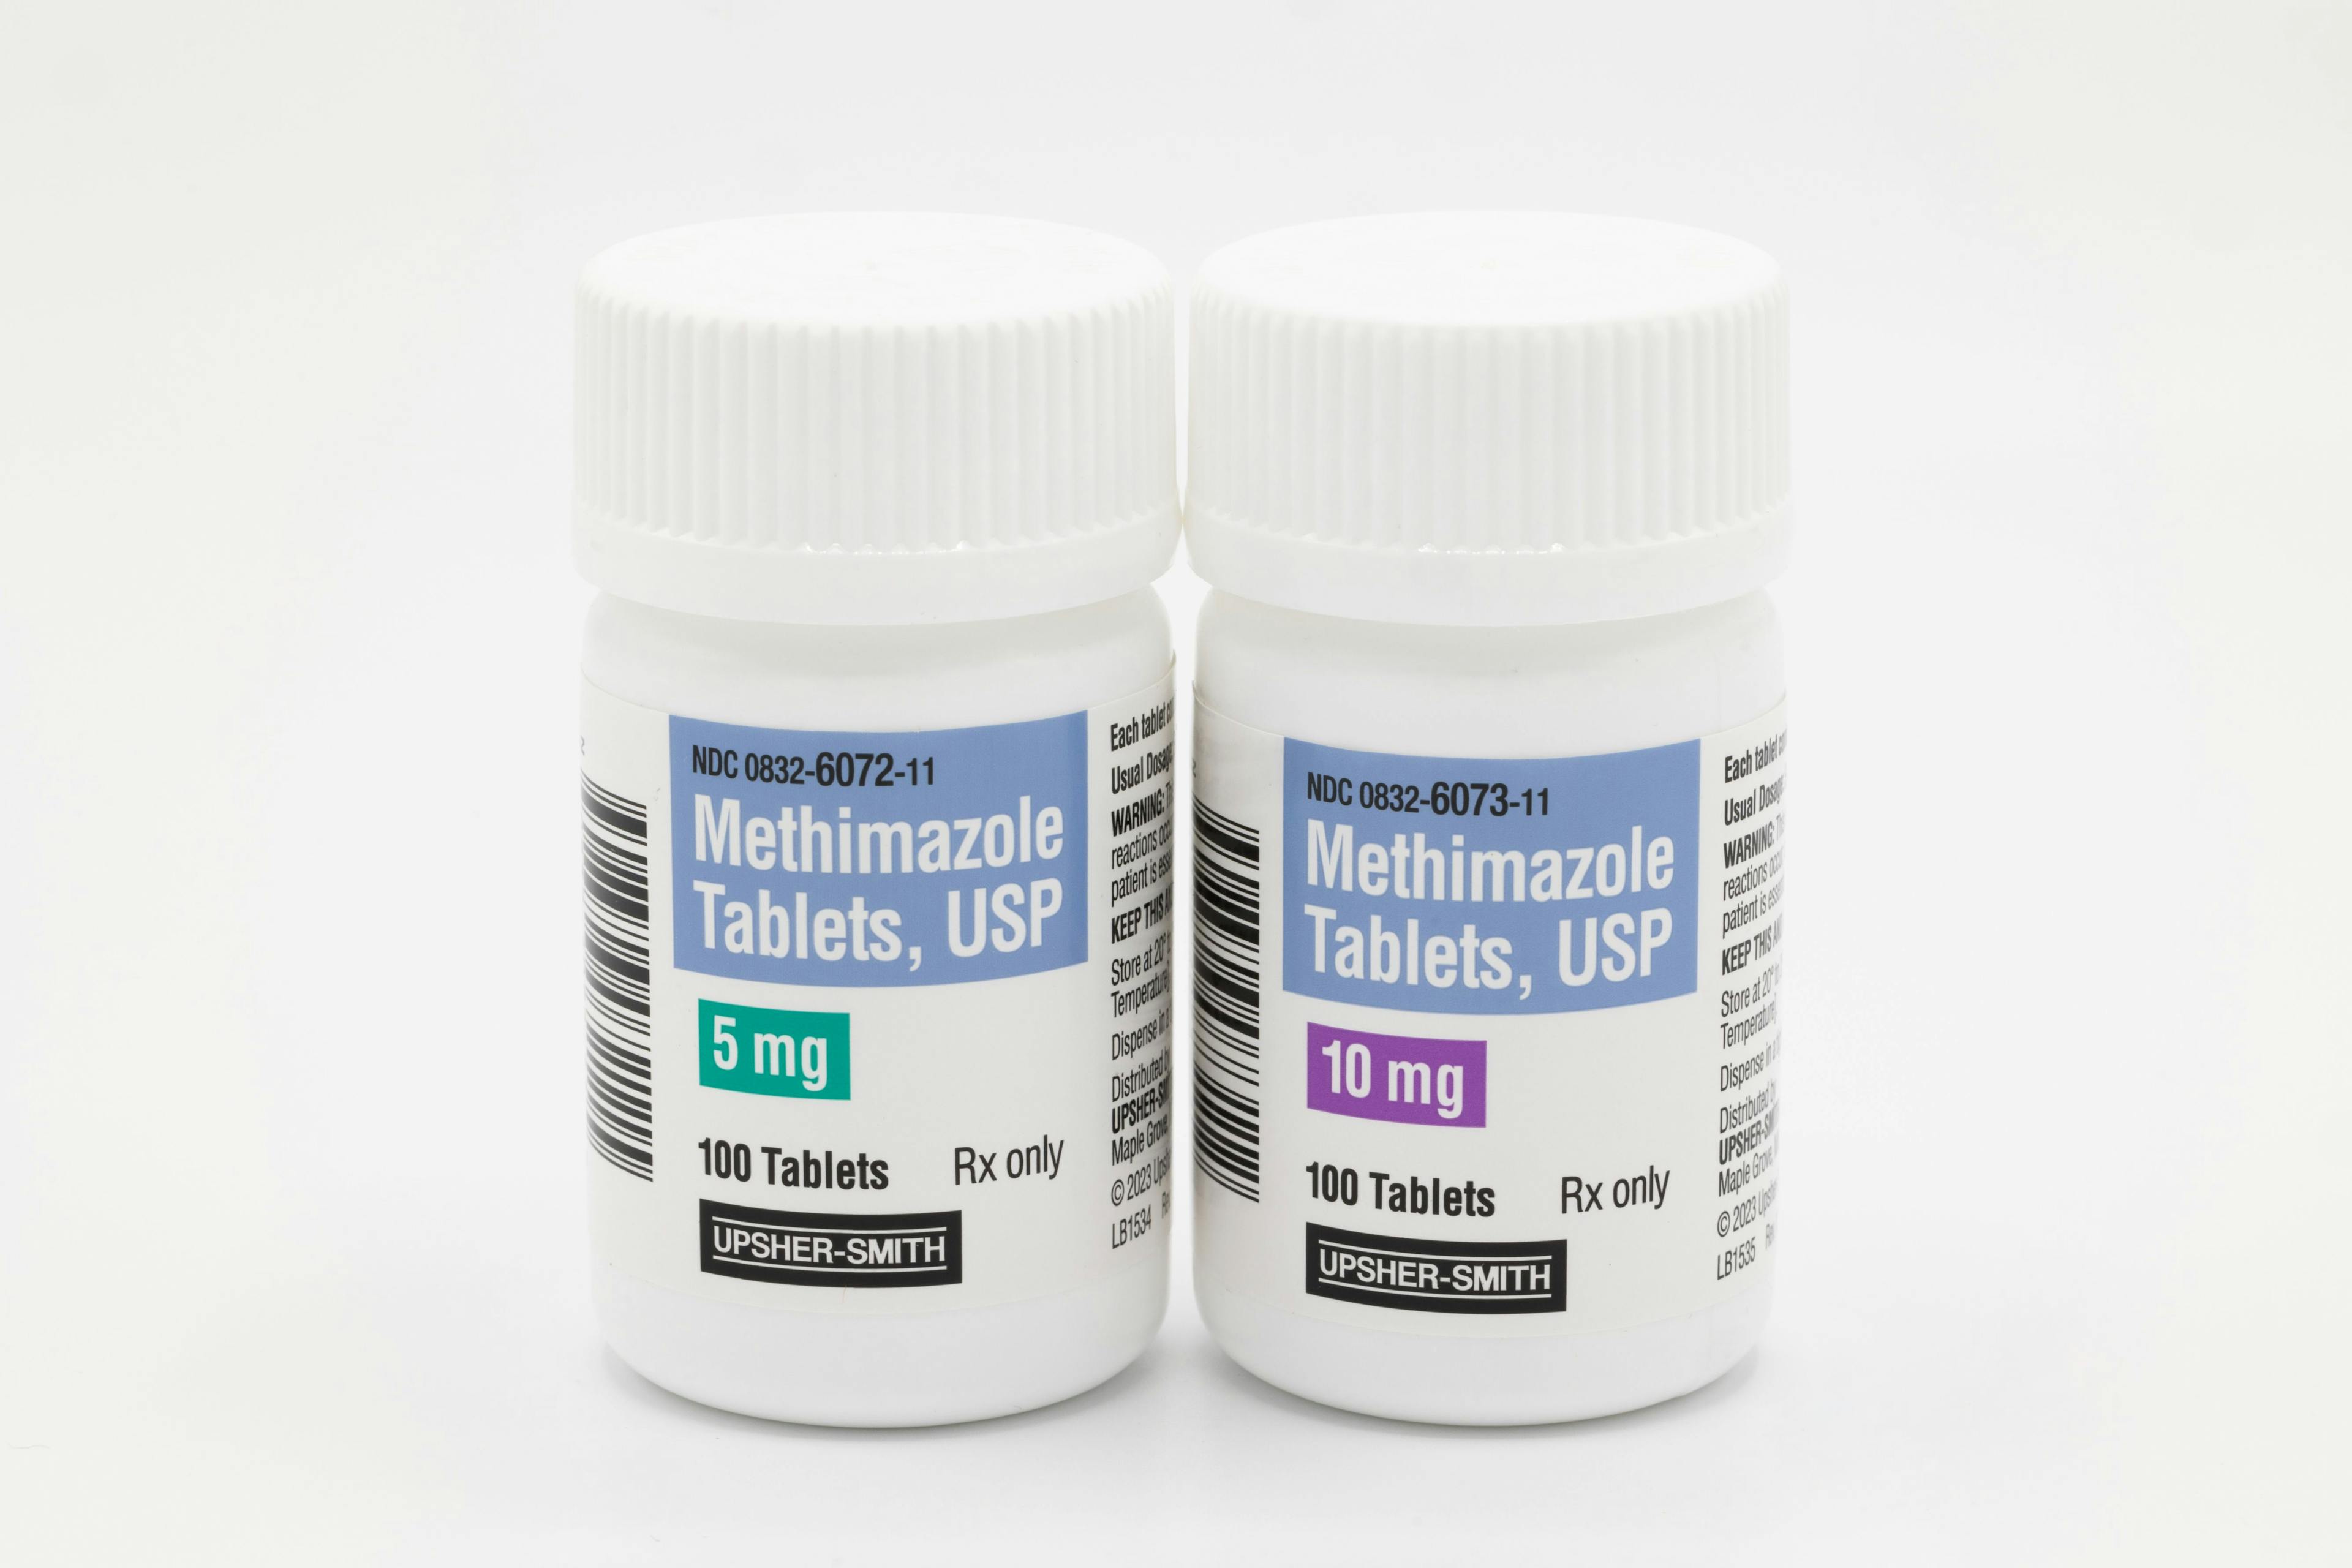 UPSHER-SMITH LAUNCHES METHIMAZOLE TABLETS, USP